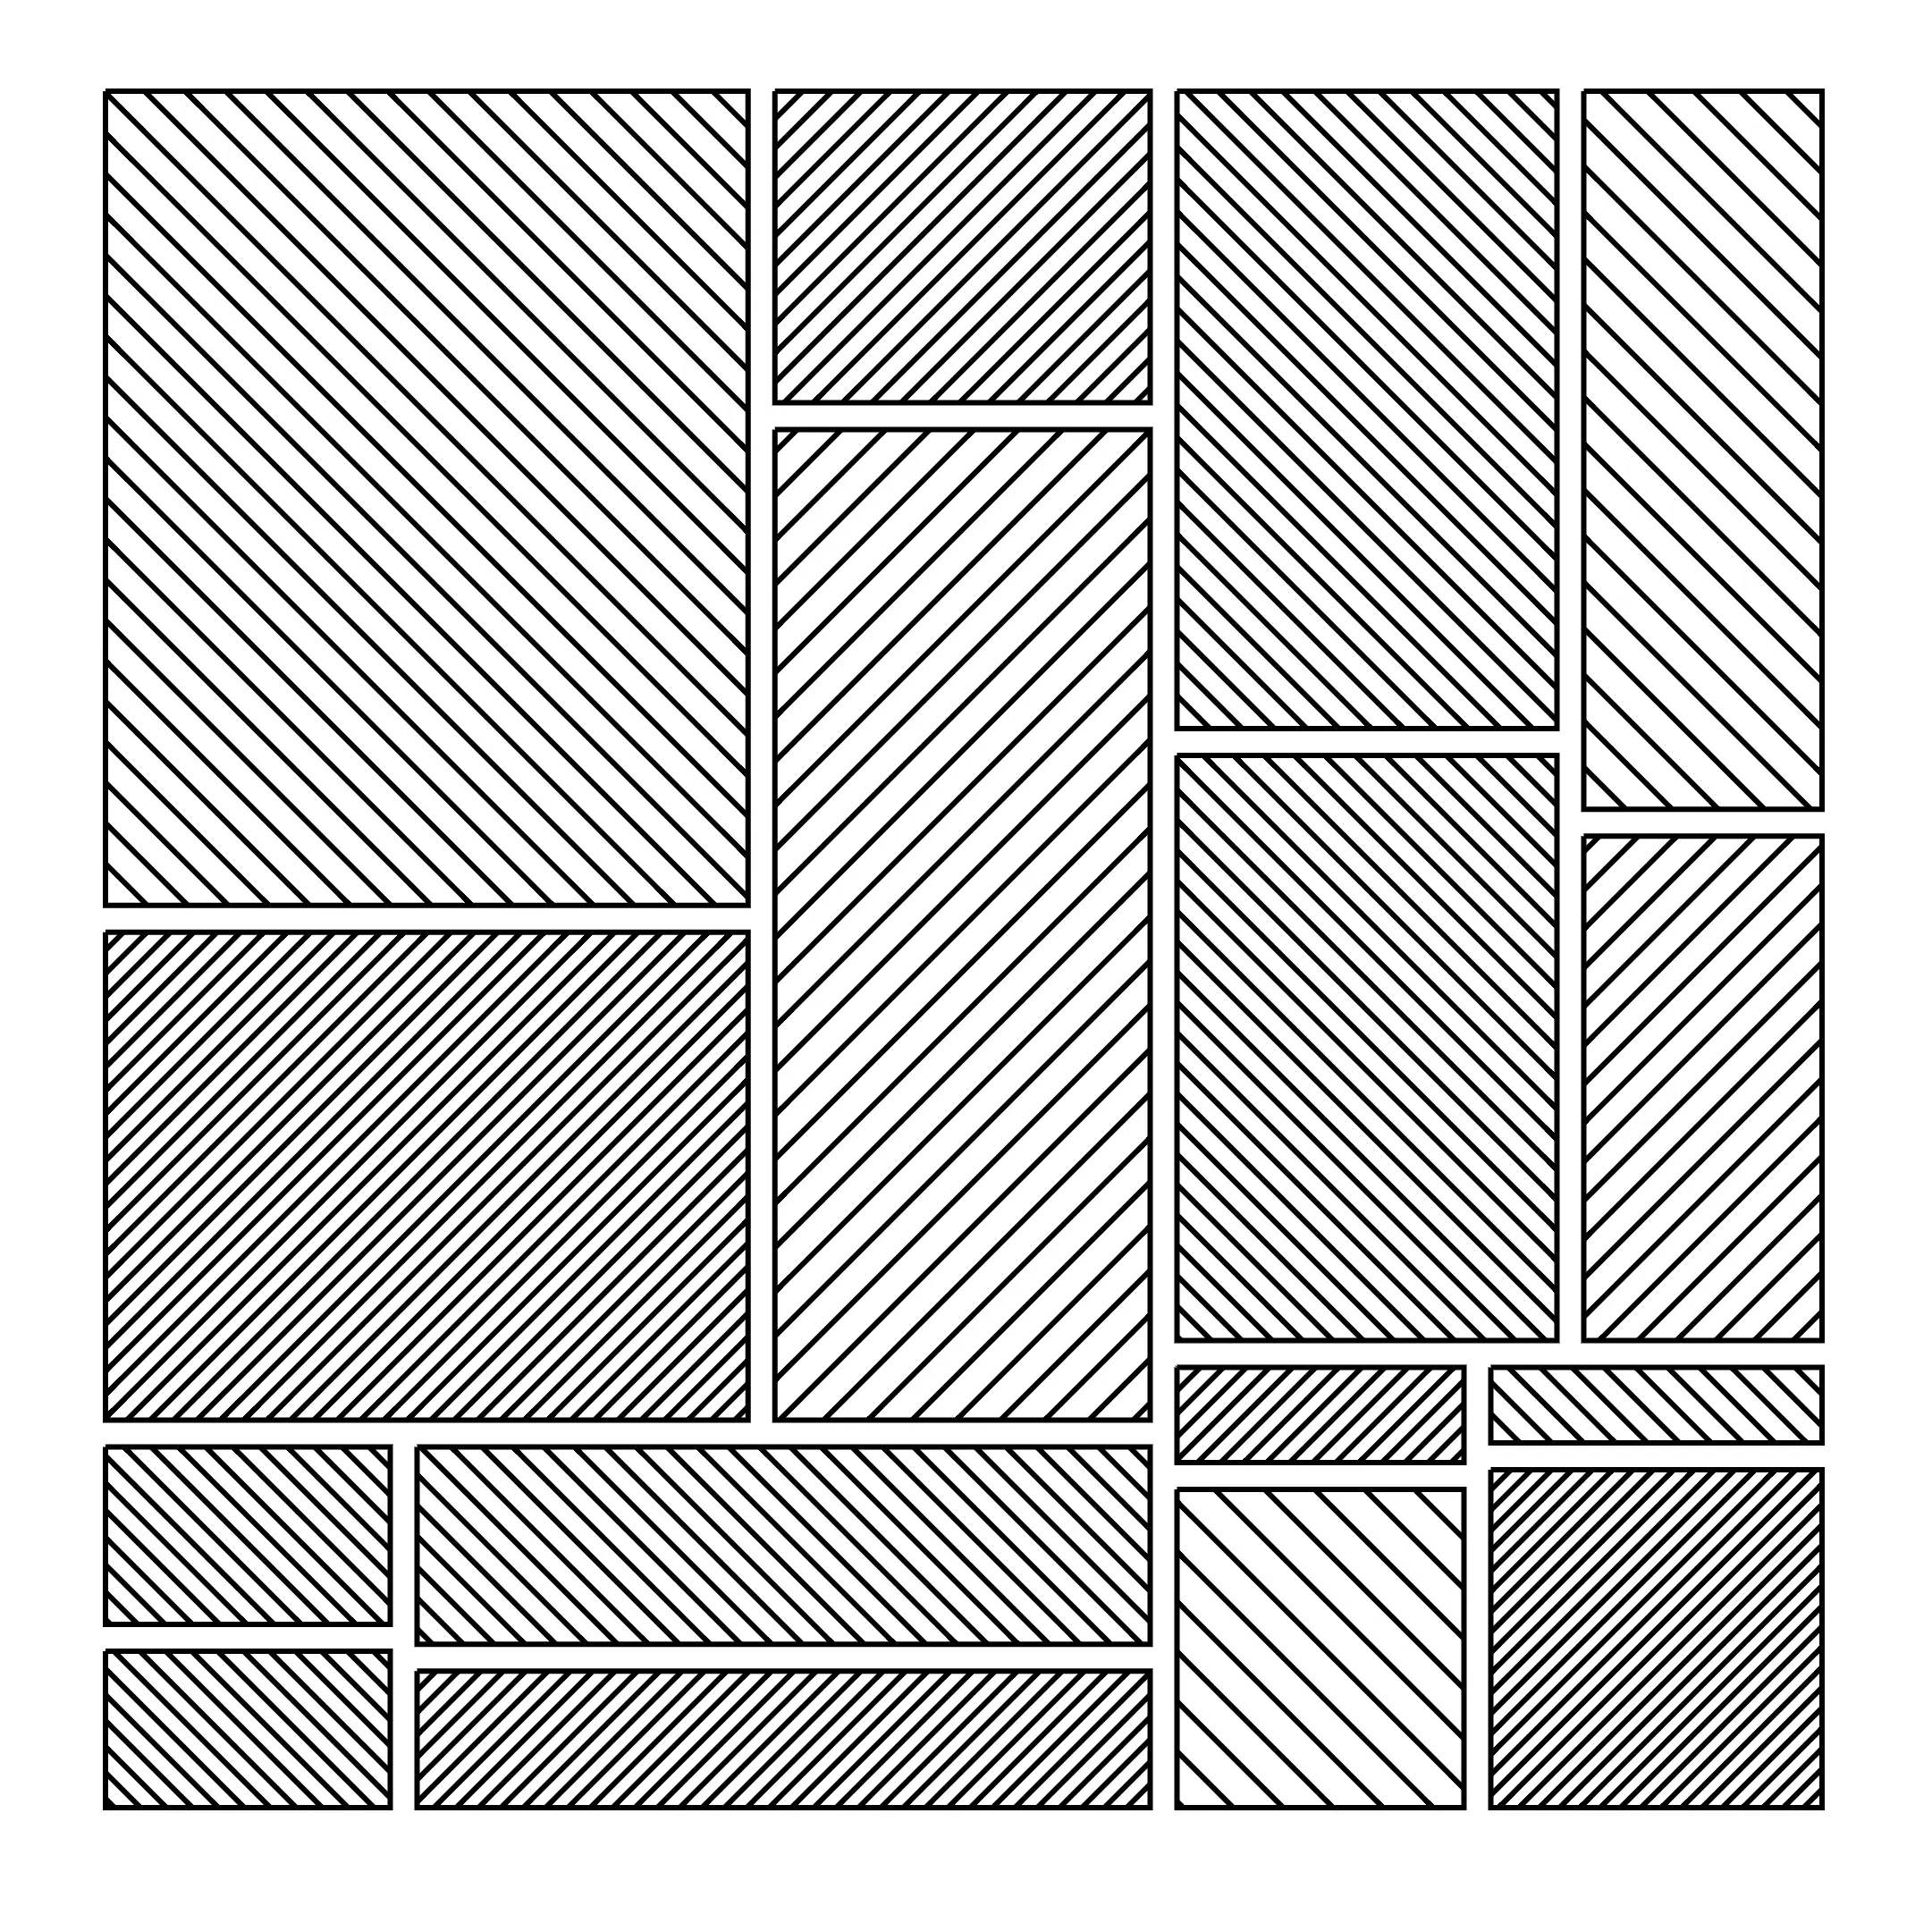 a recursively subdivided grid, where each cell is filled with many parallel straight lines at 45 degrees